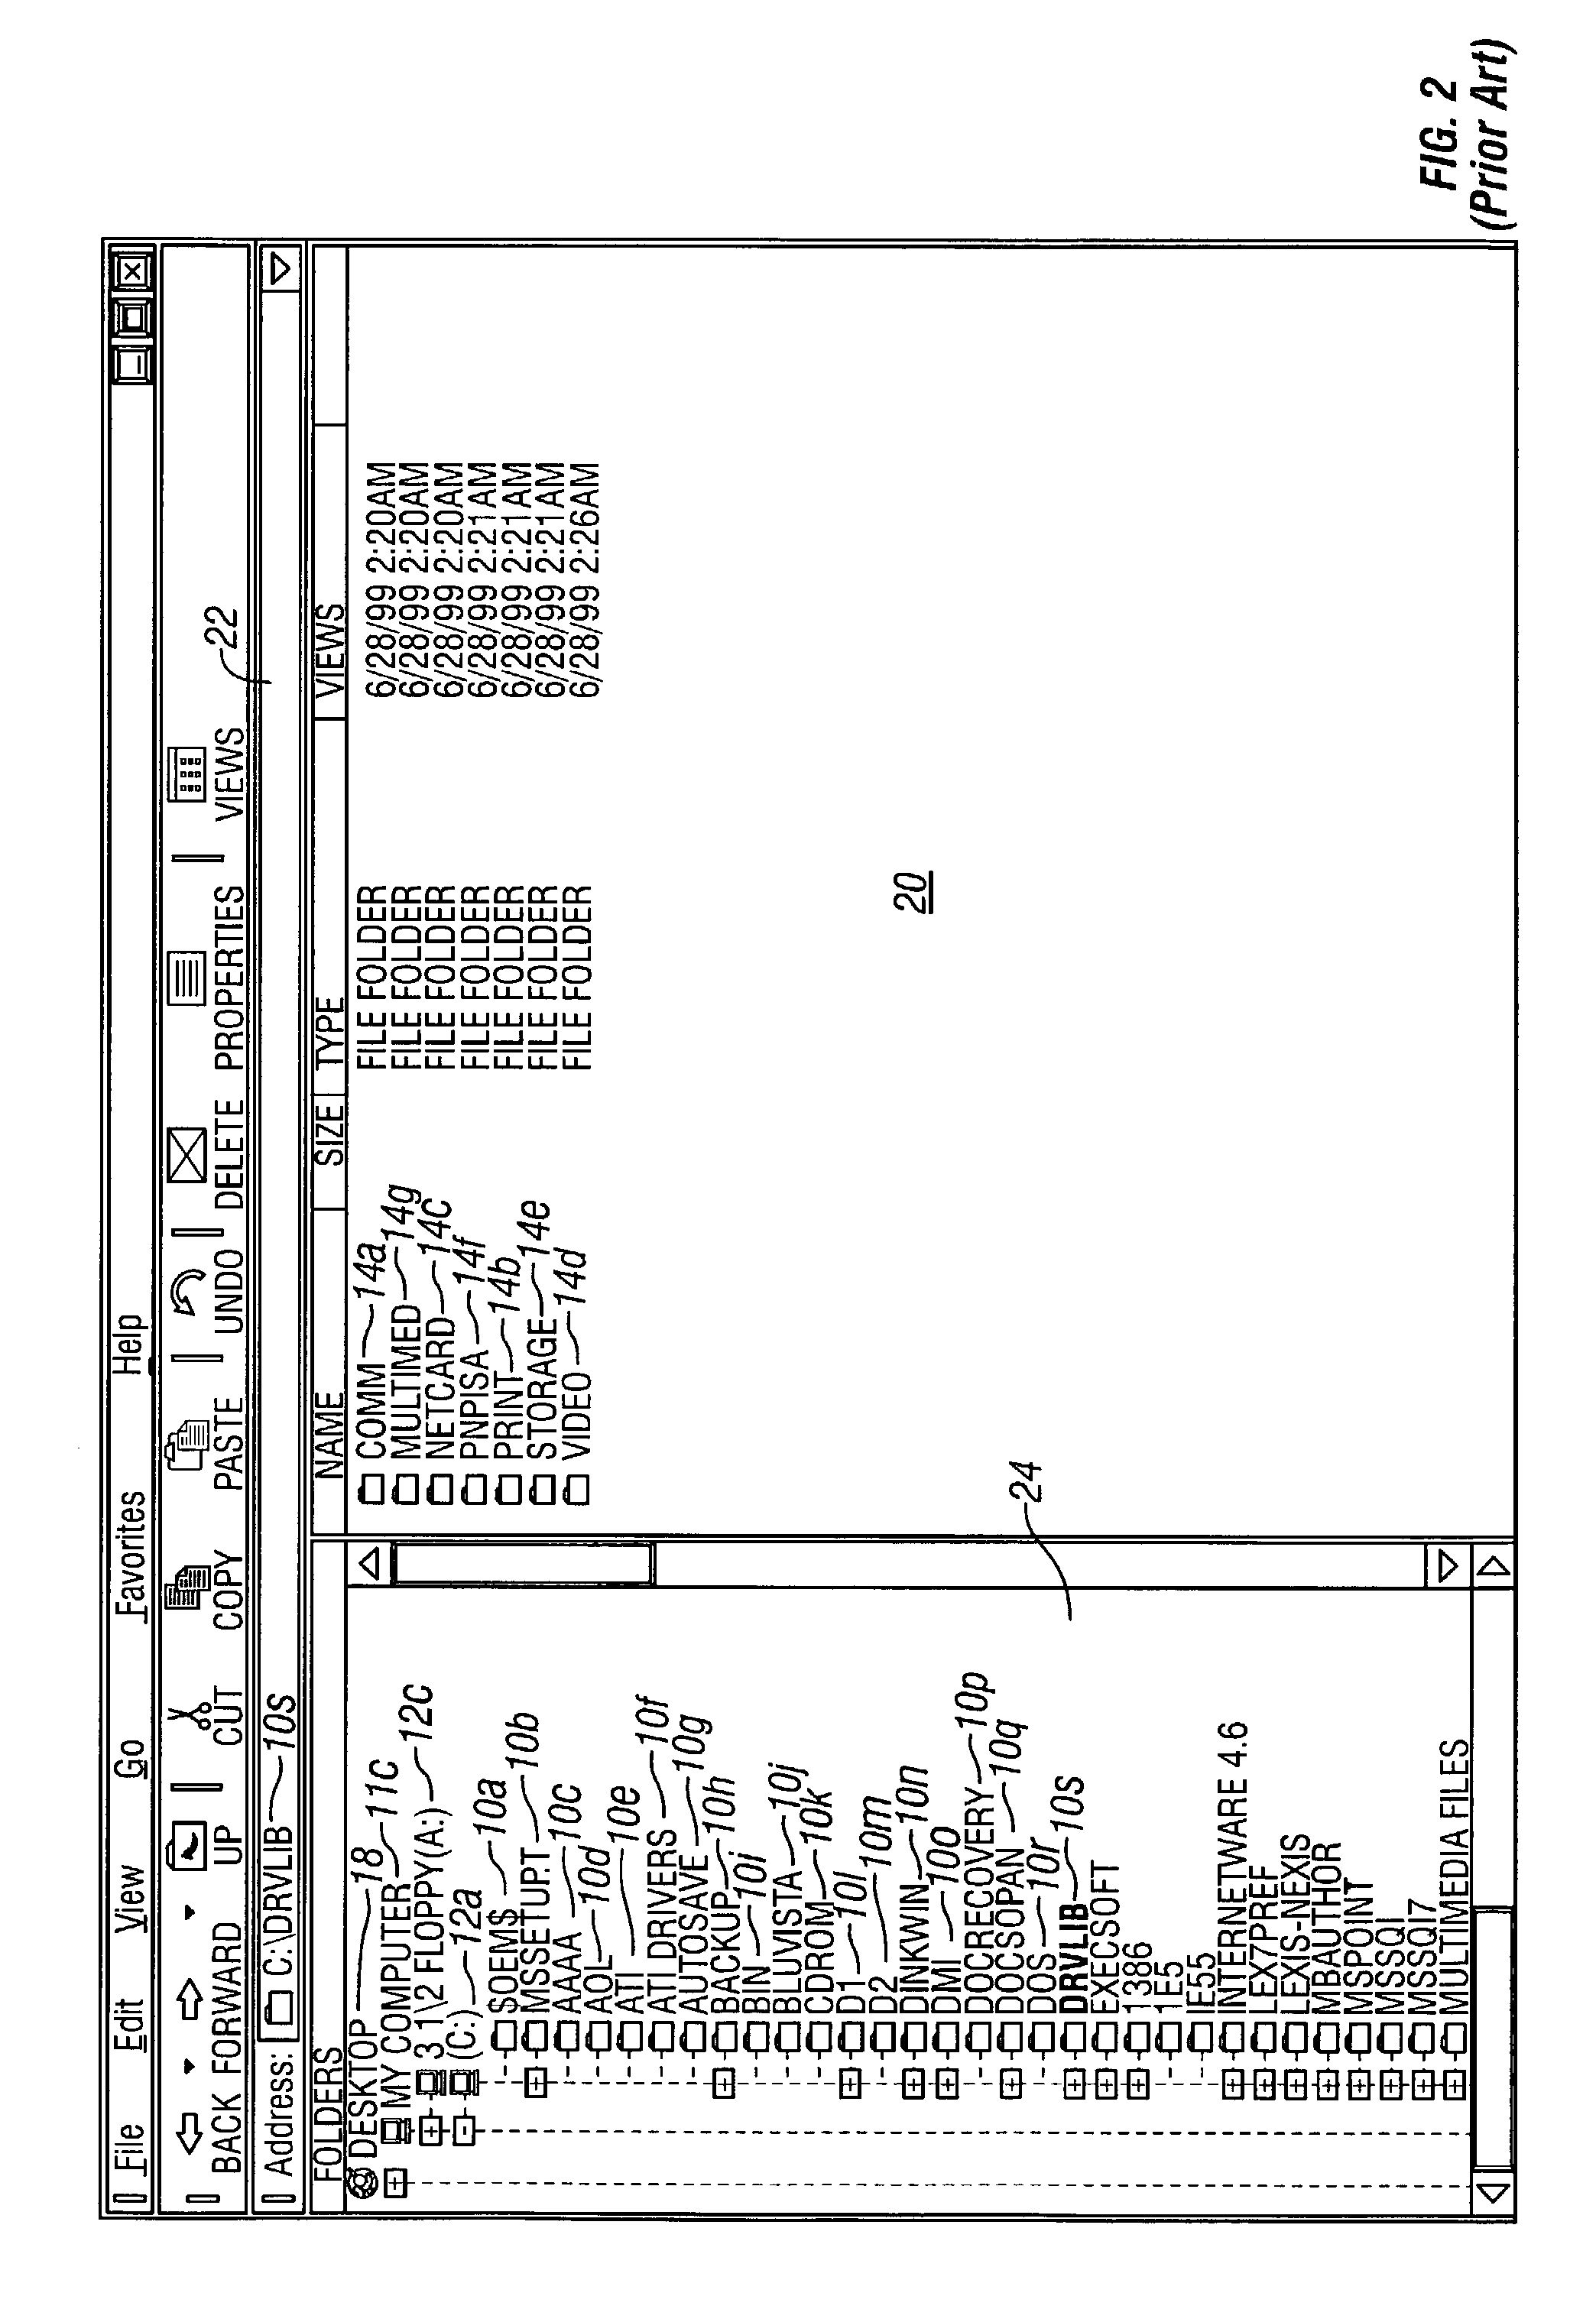 System and method for an interface to provide visualization and navigation of a directed graph